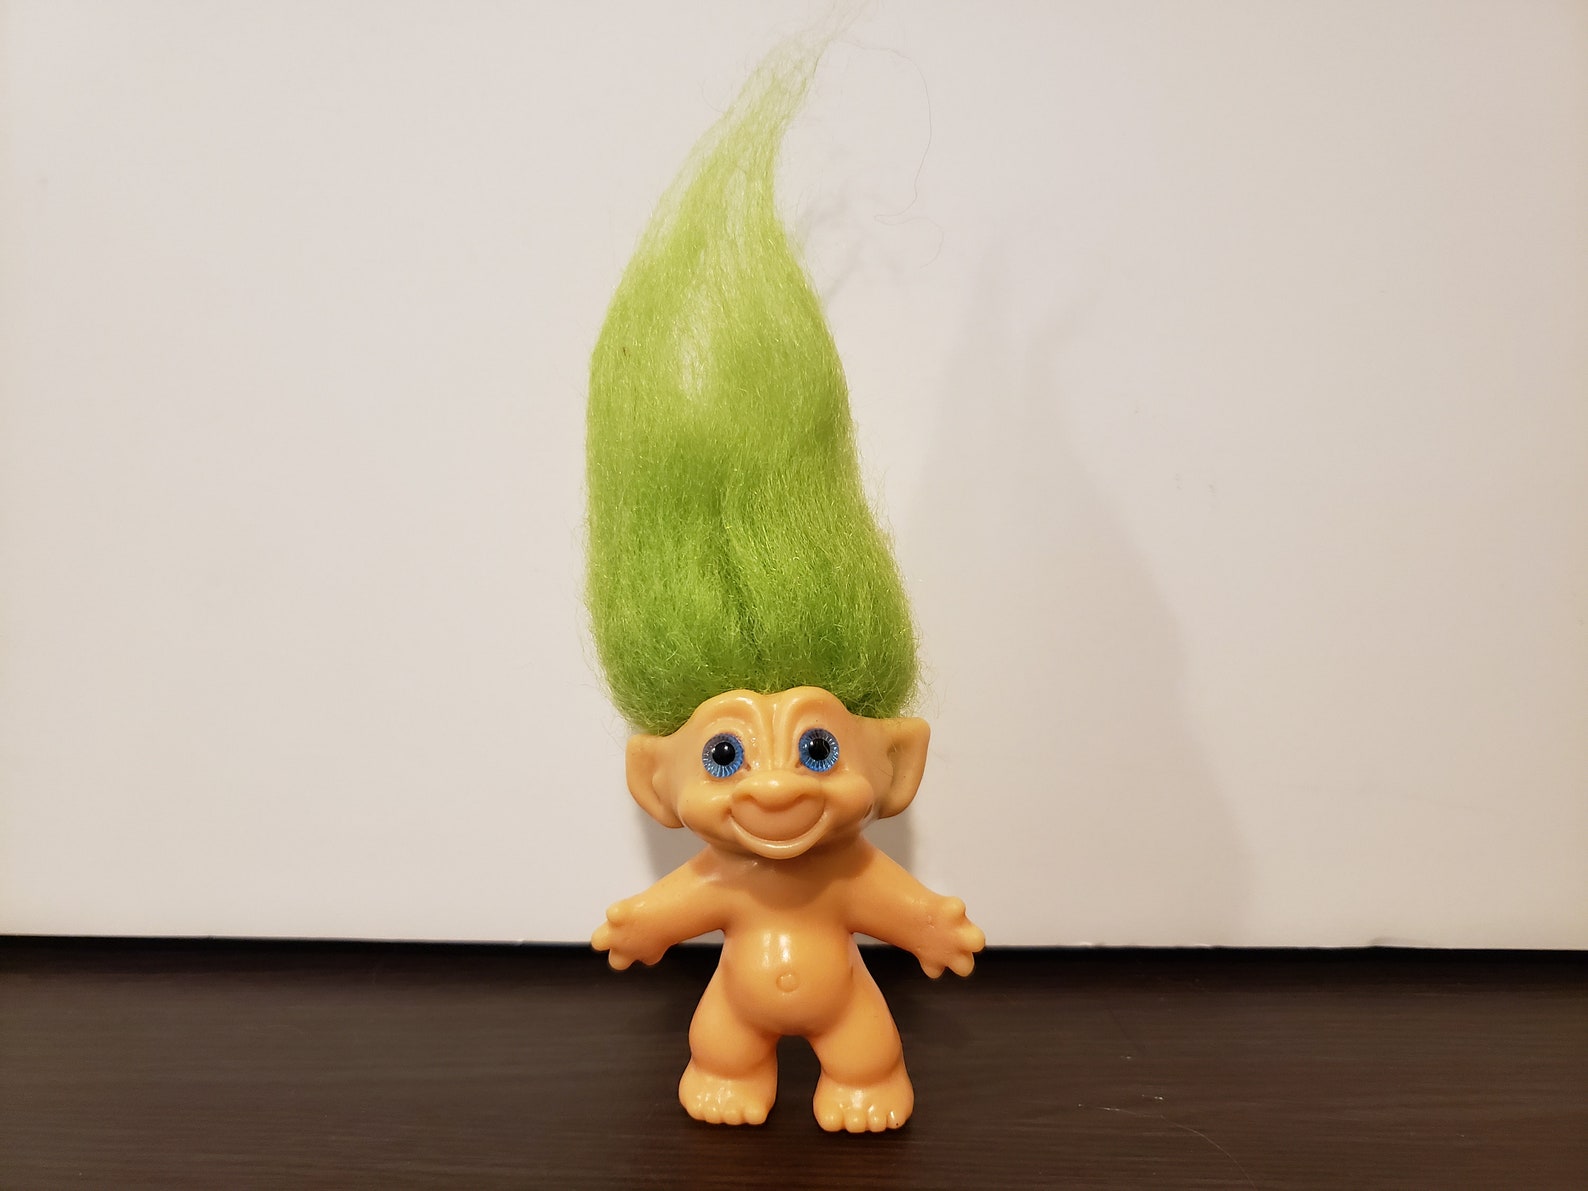 Vintage Blue Haired Troll Doll with Orange Dress - wide 7